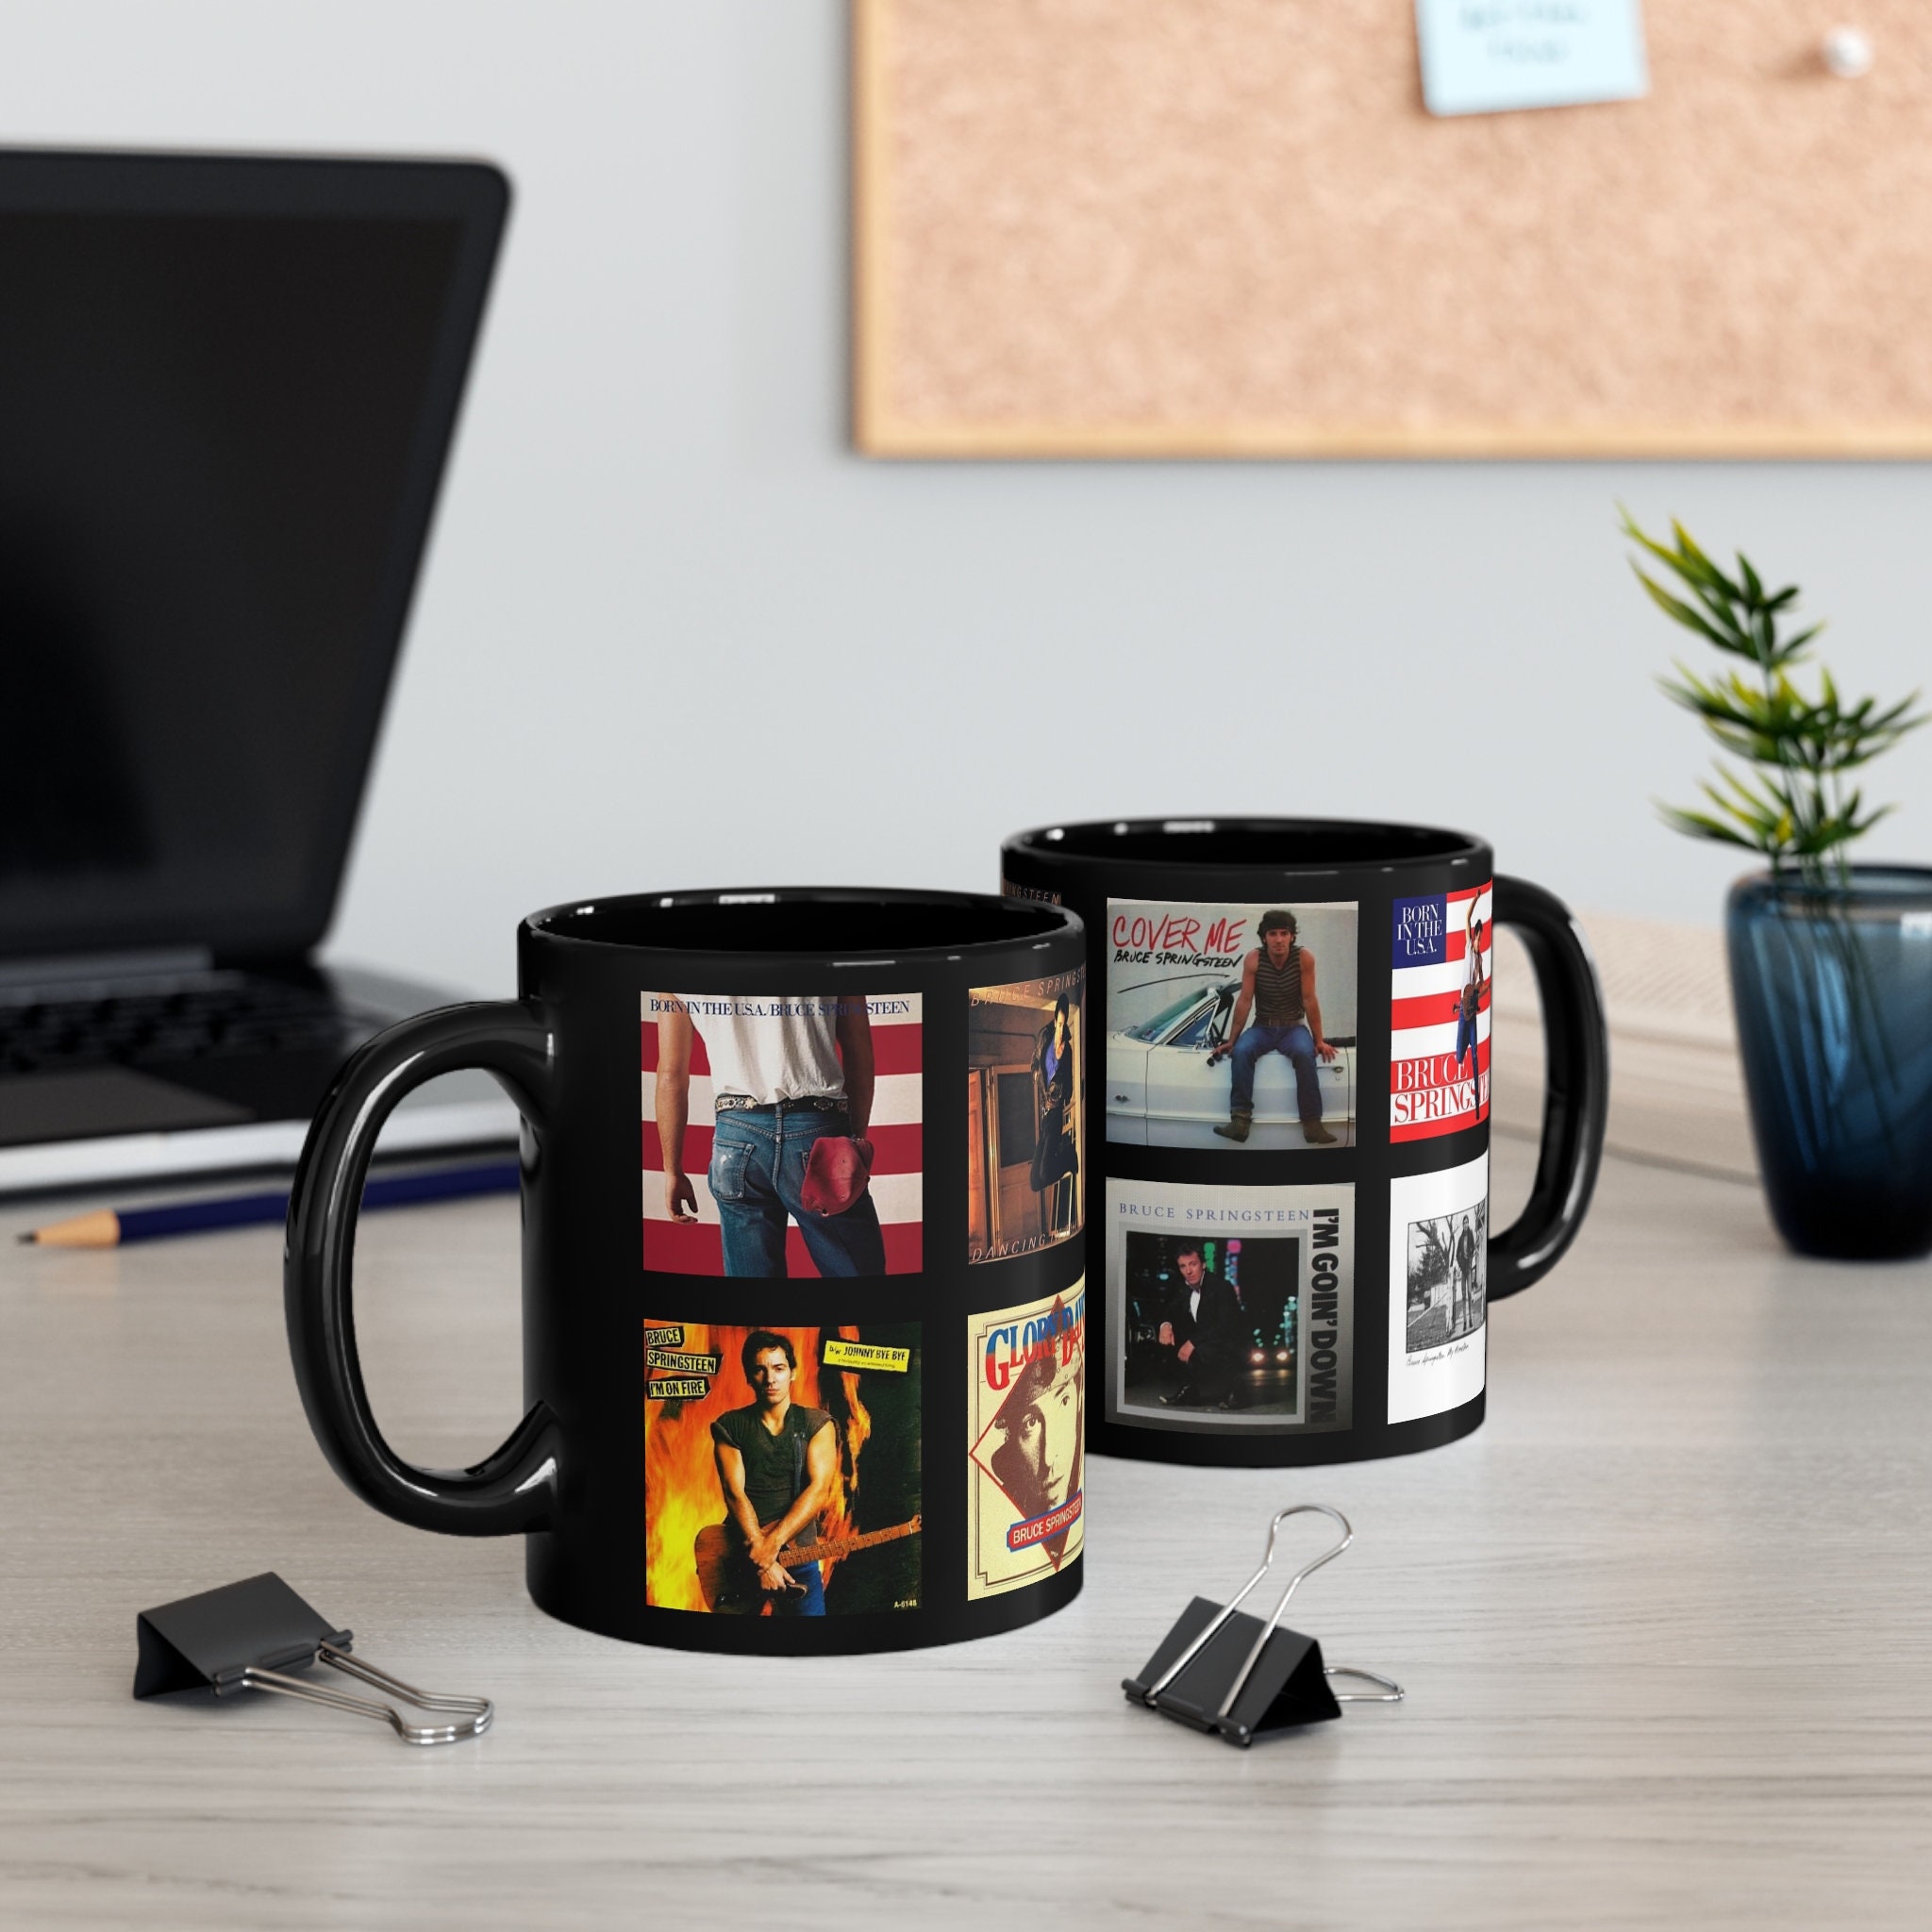 Bruce Springsteen Born in the USA mug, with images of the album and singles covers